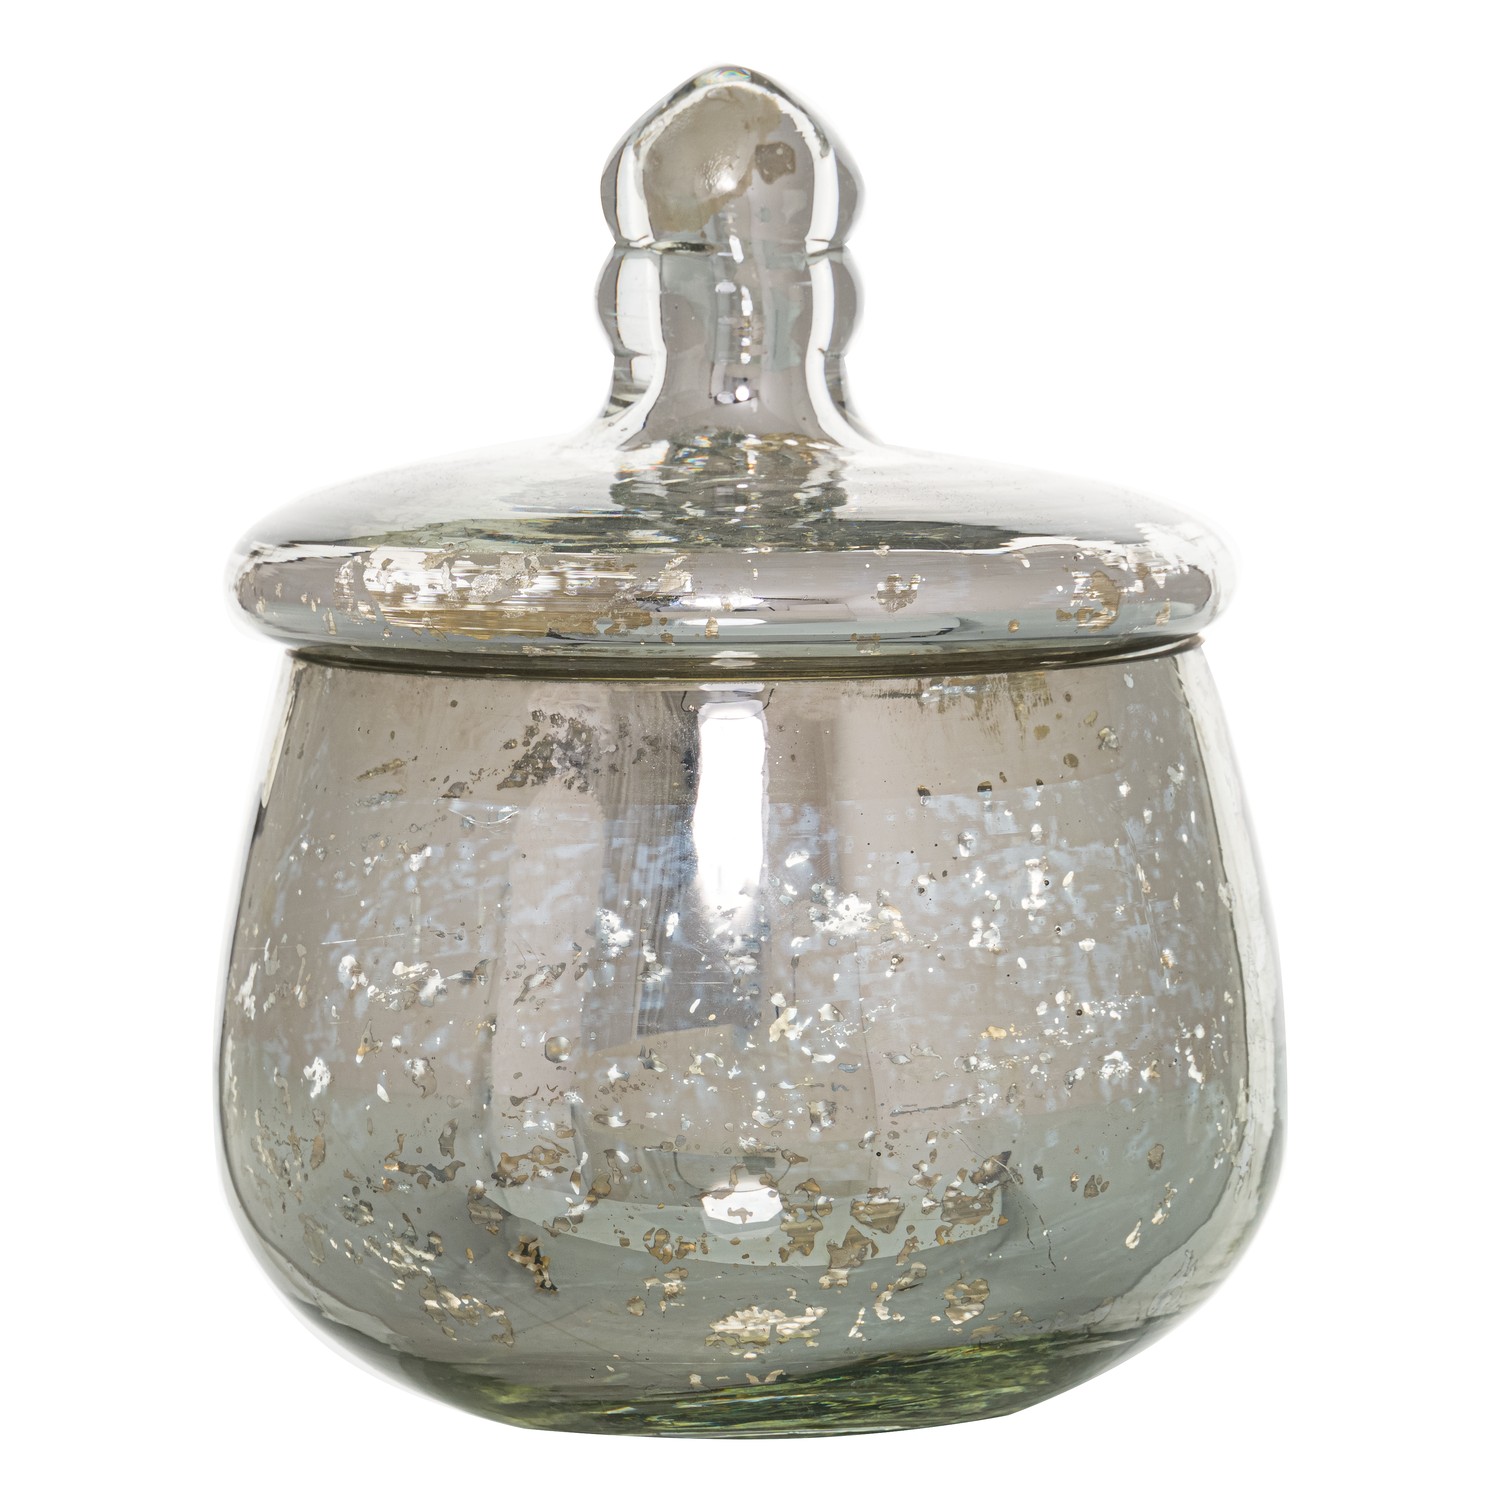 The Noel Collection Small Silver Bulbous Trinket Jar - Image 1